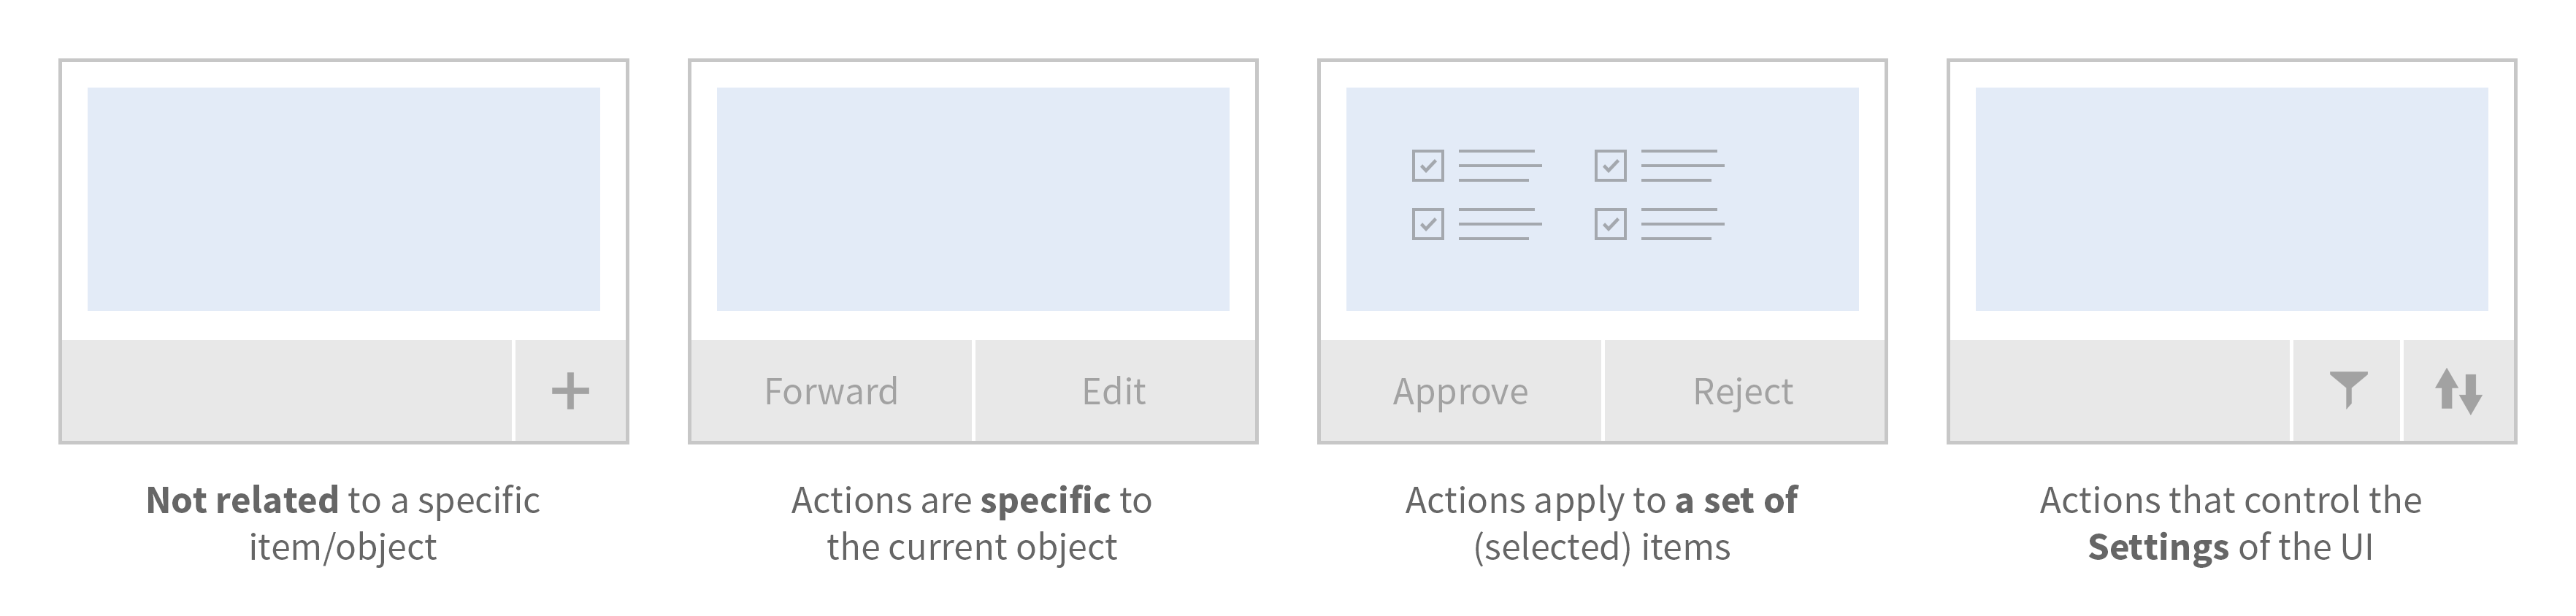 Types of actions (from left to right): Not related to a specific item/object; actions are specific to the current object; actions apply to a set of (selected) items; actions that control the settings of the UI